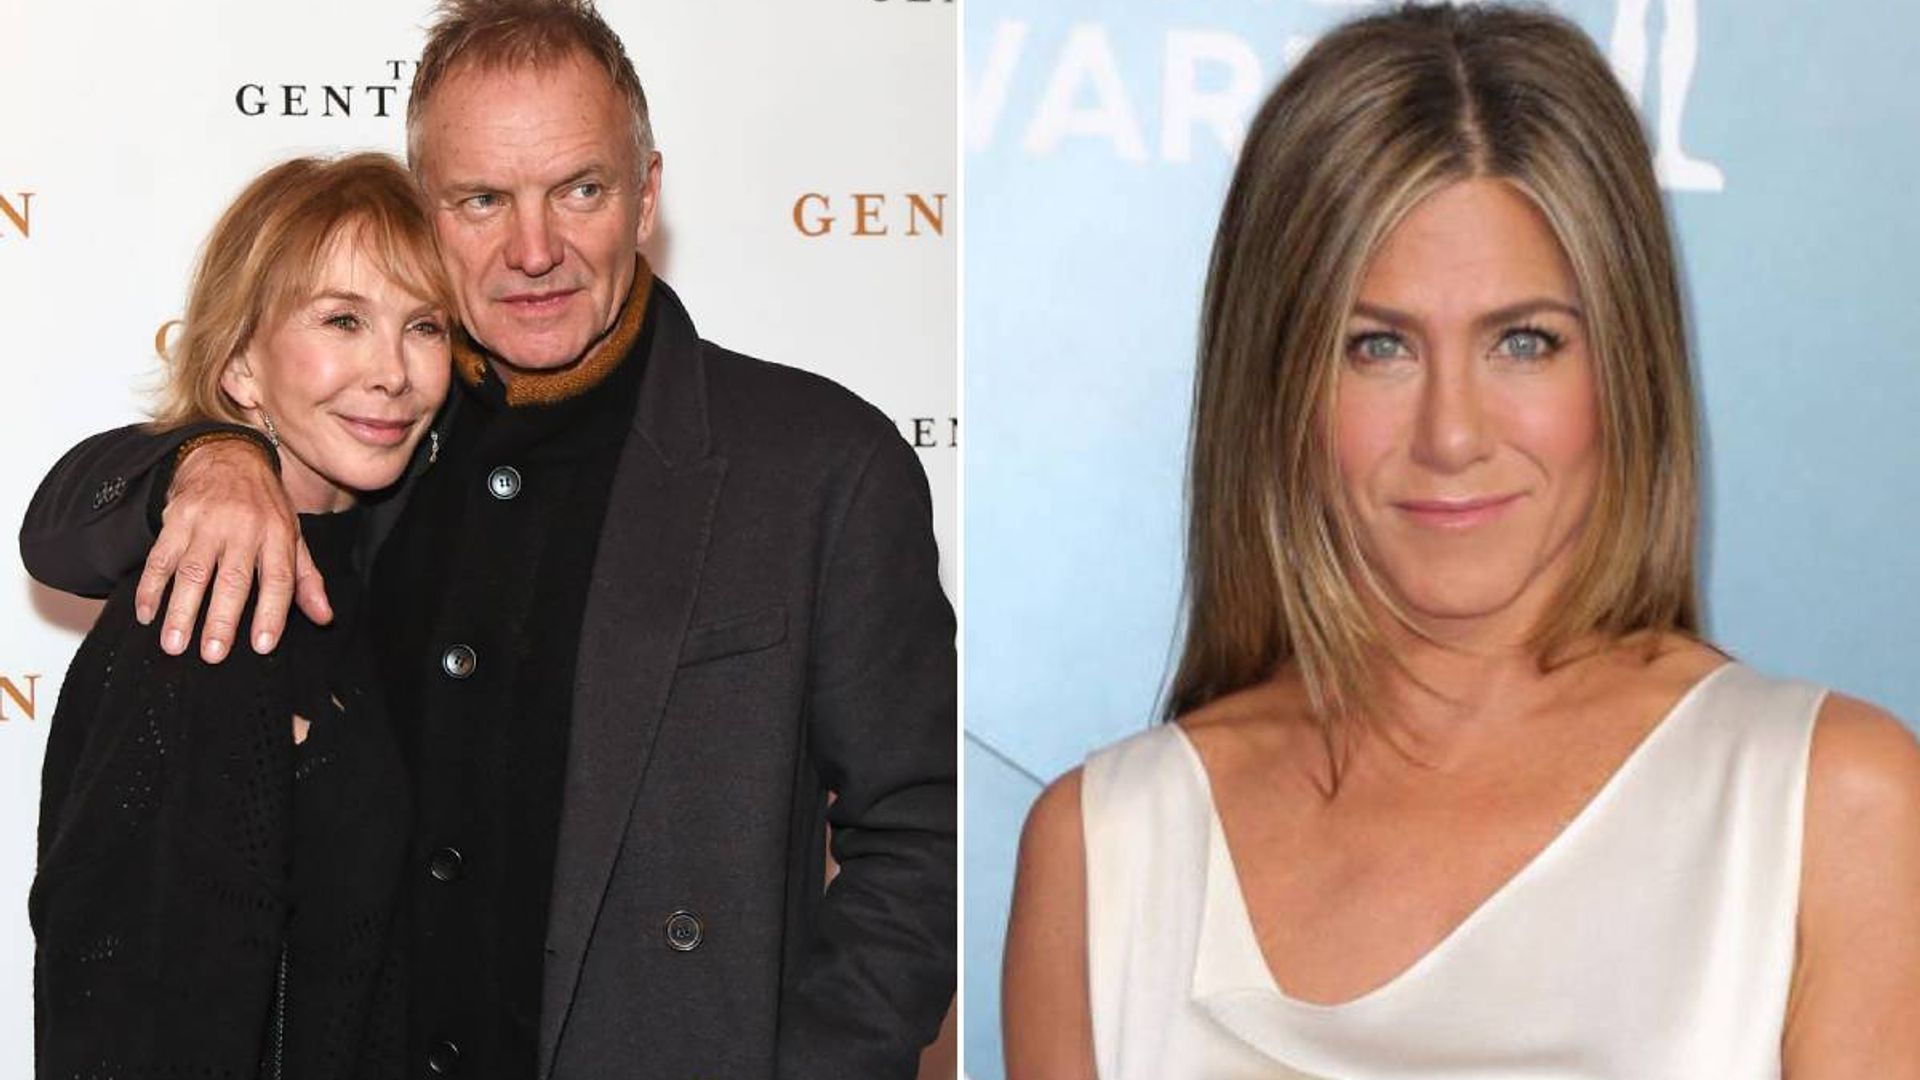 Sting and Trudie Styler stun fans with loved-up photo - and even Jennifer Aniston reacts!